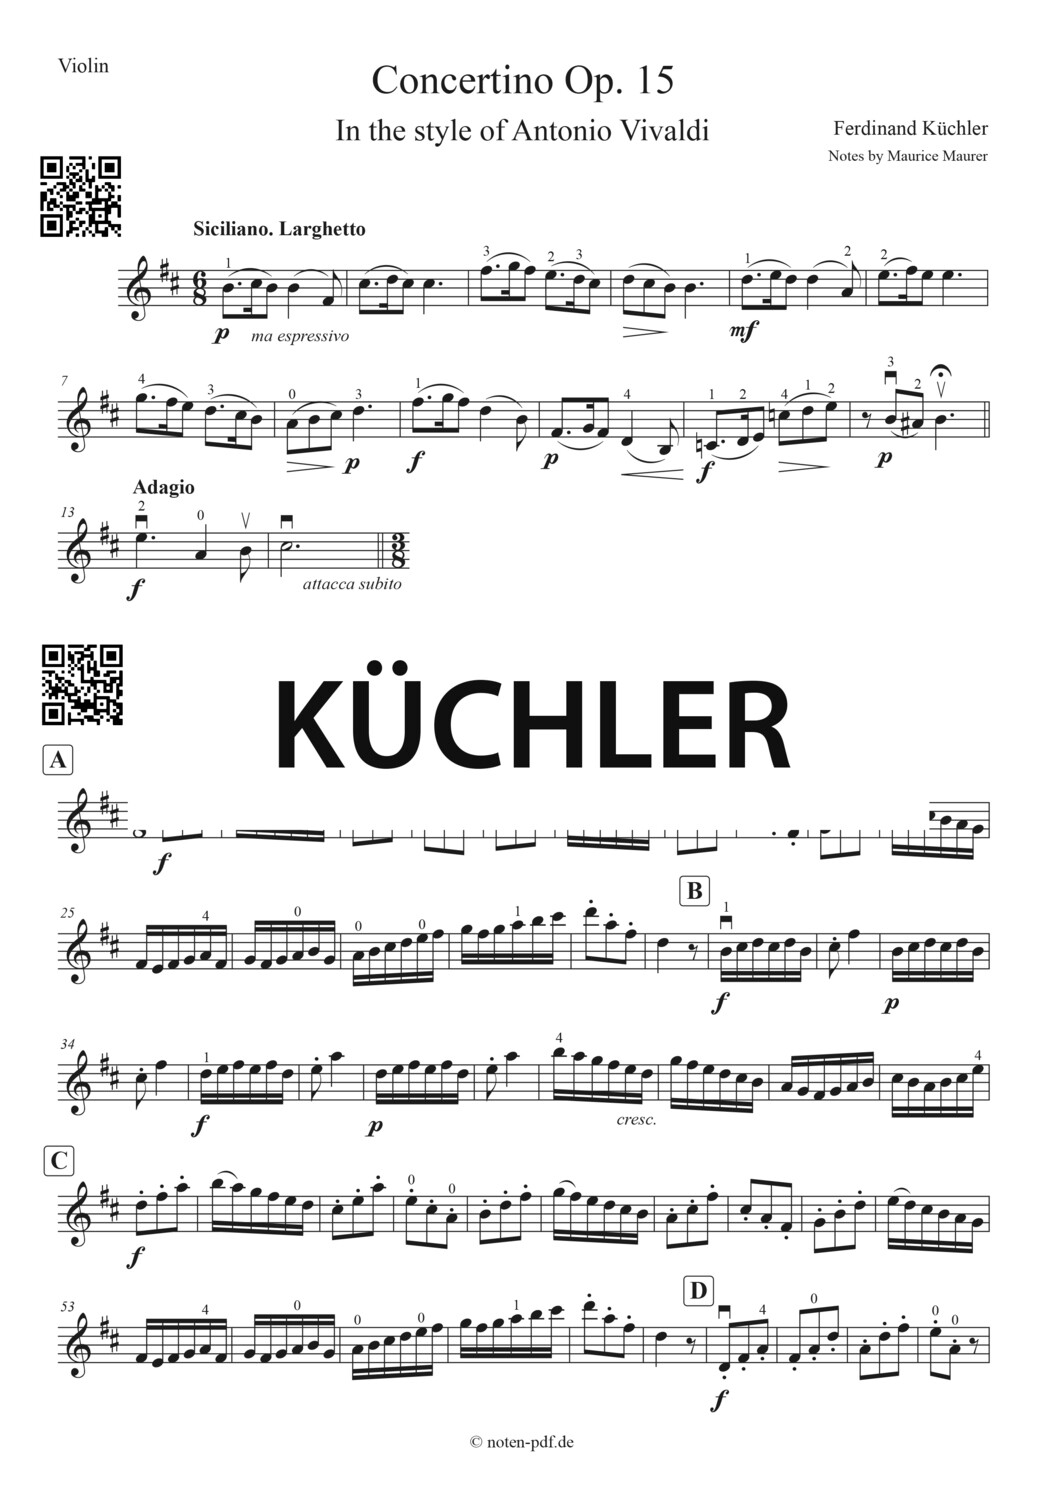 Küchler: Concertino Op. 15 - 2. + 3. Movement